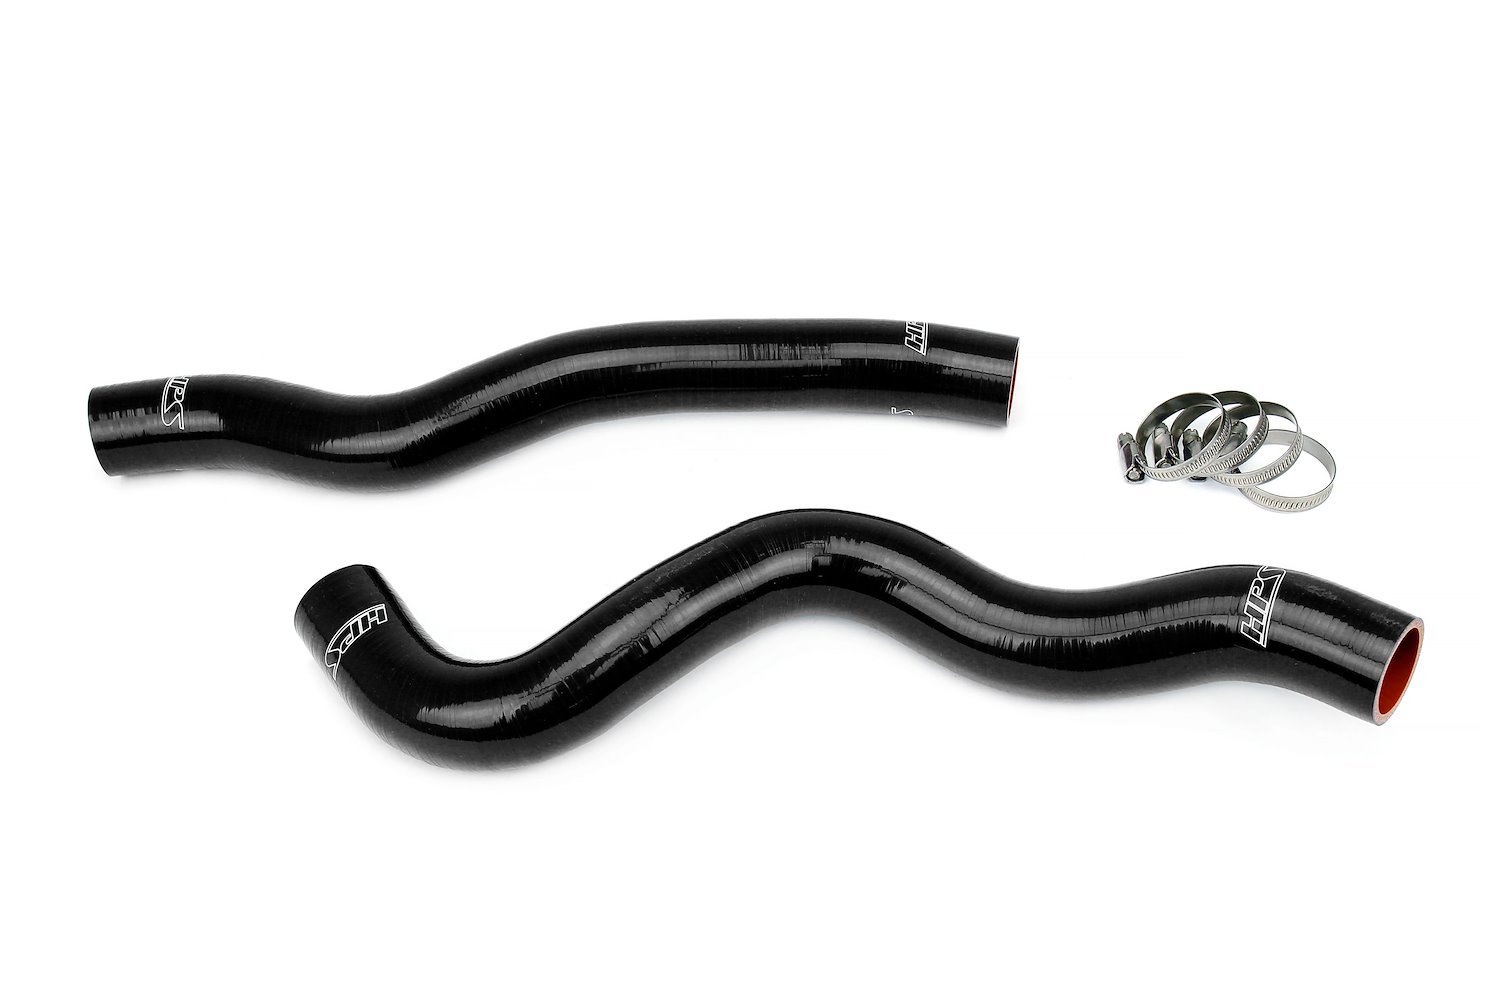 57-1964-BLK Radiator Hose Kit, 3-Ply Reinforced Silicone, Replaces Rubber Radiator Coolant Hoses